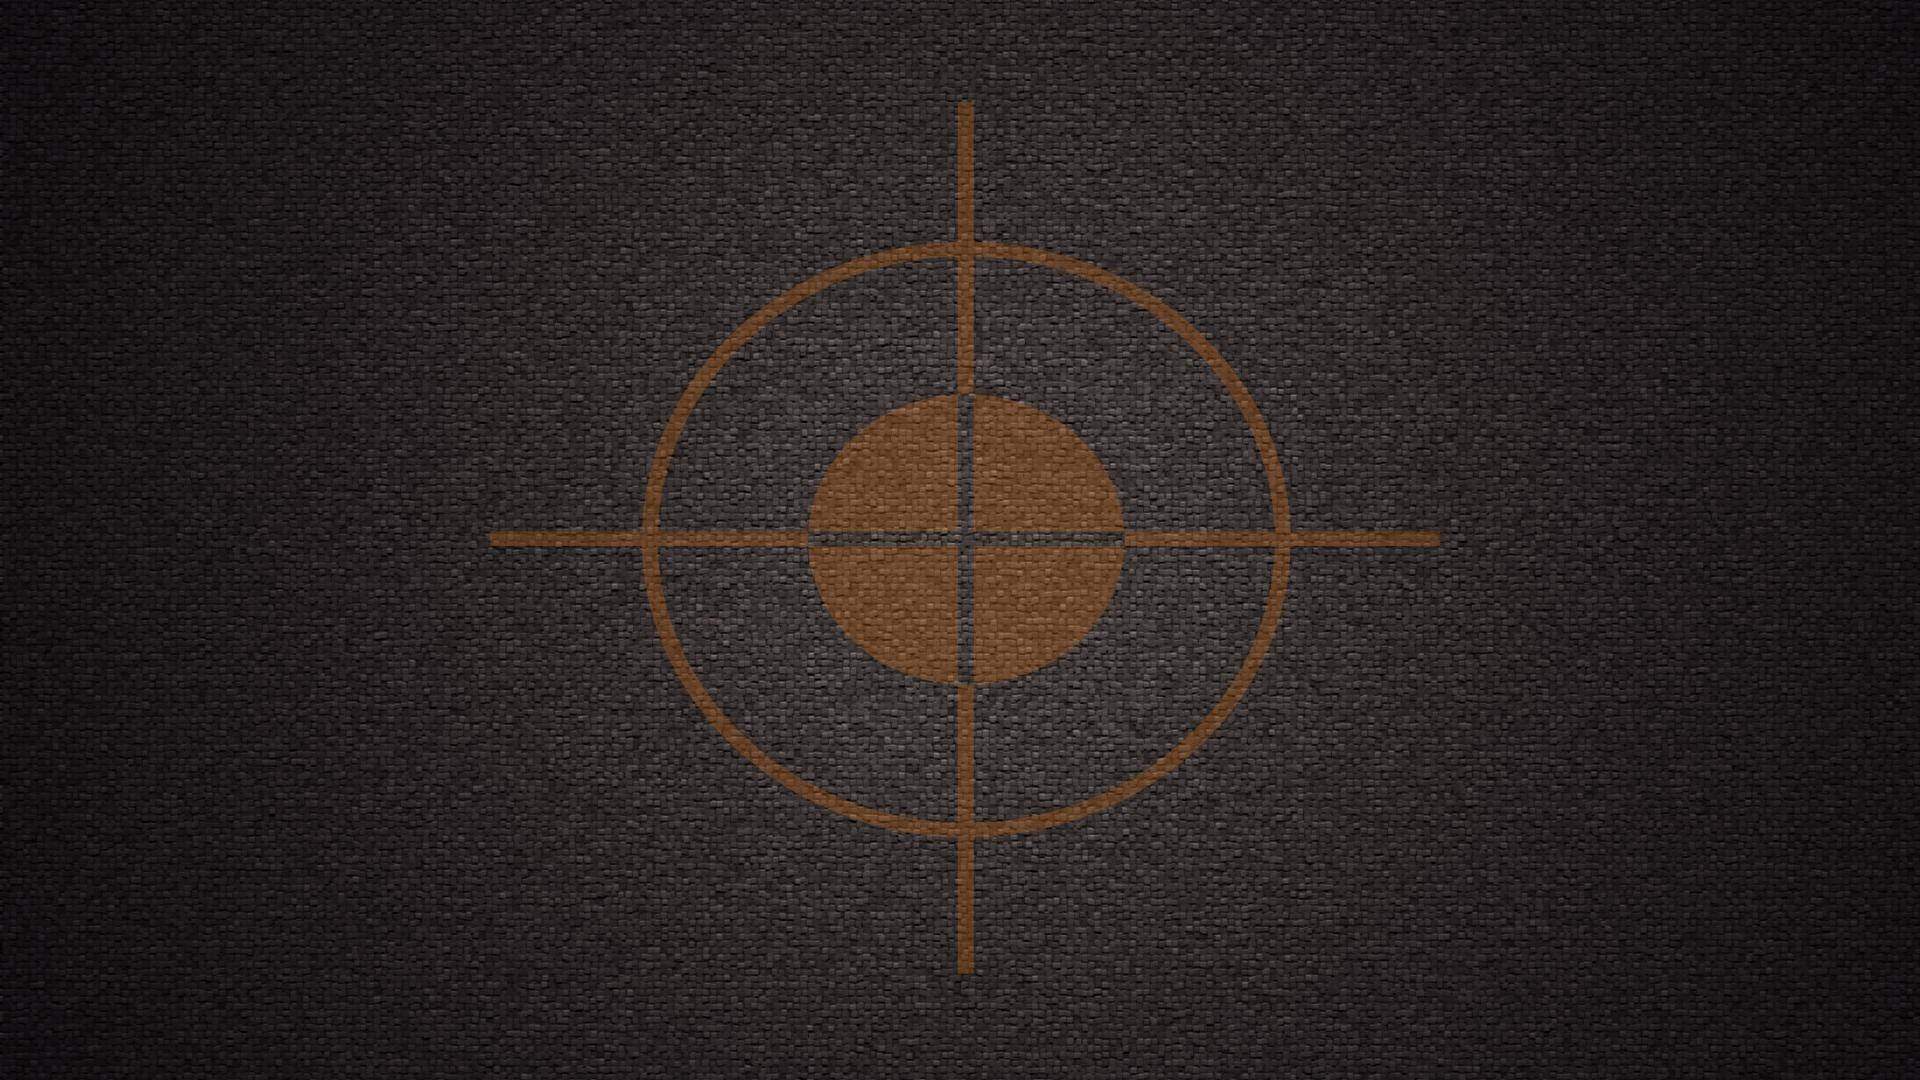 1920X1080 Target Wallpaper and Background